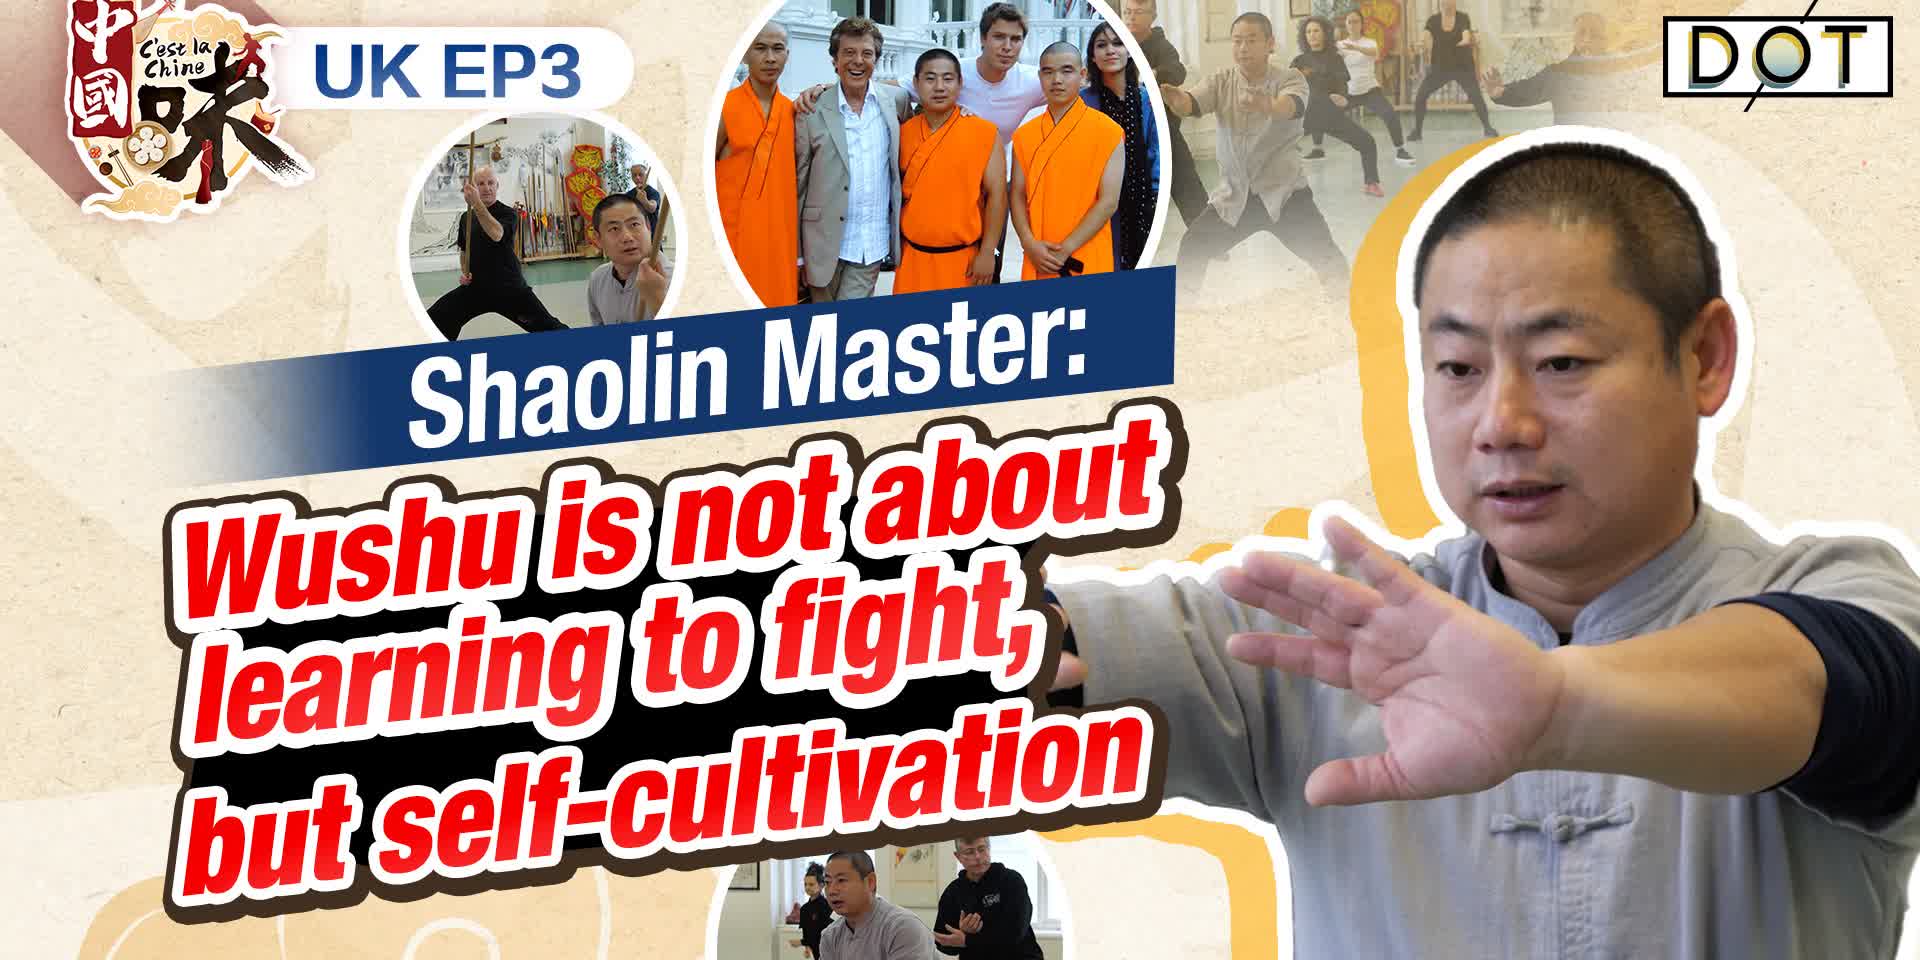 C'est la Chine - UK｜Shaolin Master: Wushu is not about learning to fight, but self-cultivation